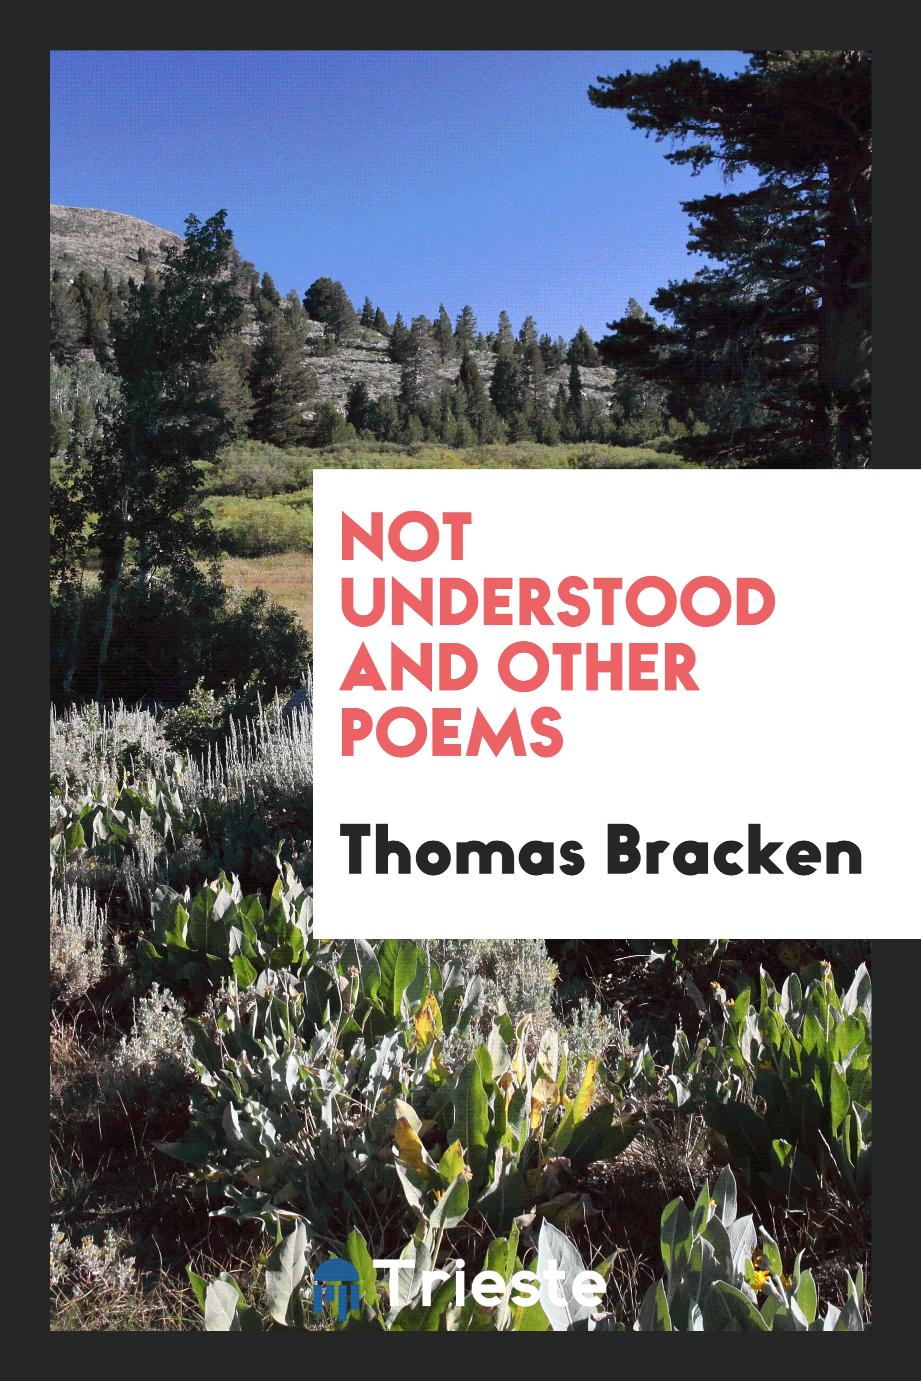 Not Understood and Other Poems